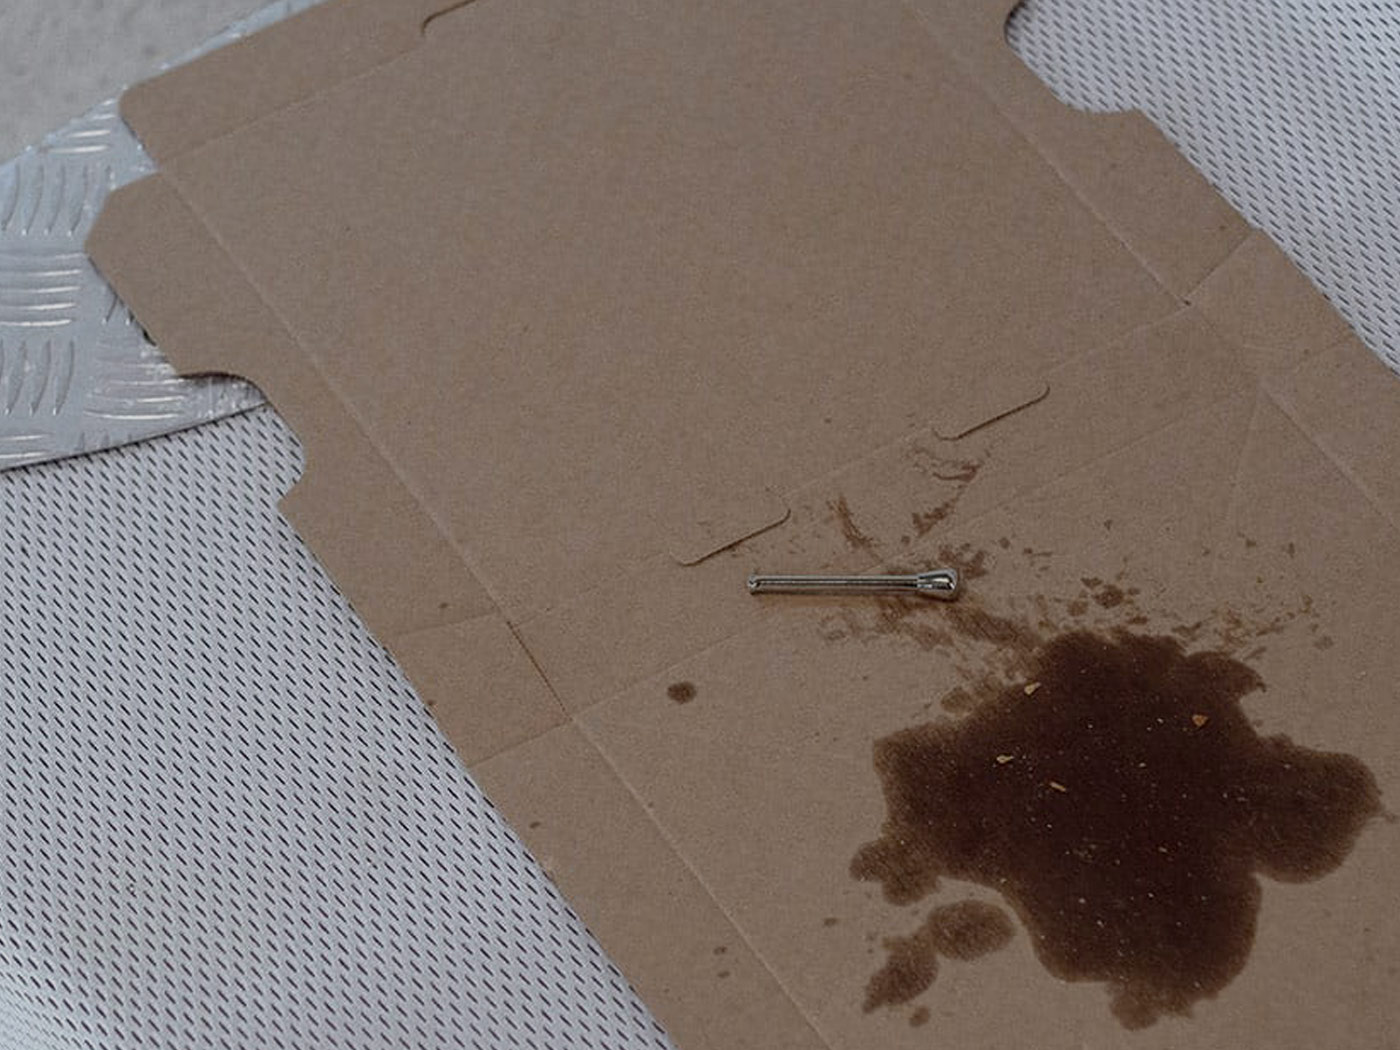 A snorting tube on an unfolded pizza box, which is placed on a mattress. There is a large residue of fat underneath the snorting tube. At the corner of the mattress is an aluminum stair guard.